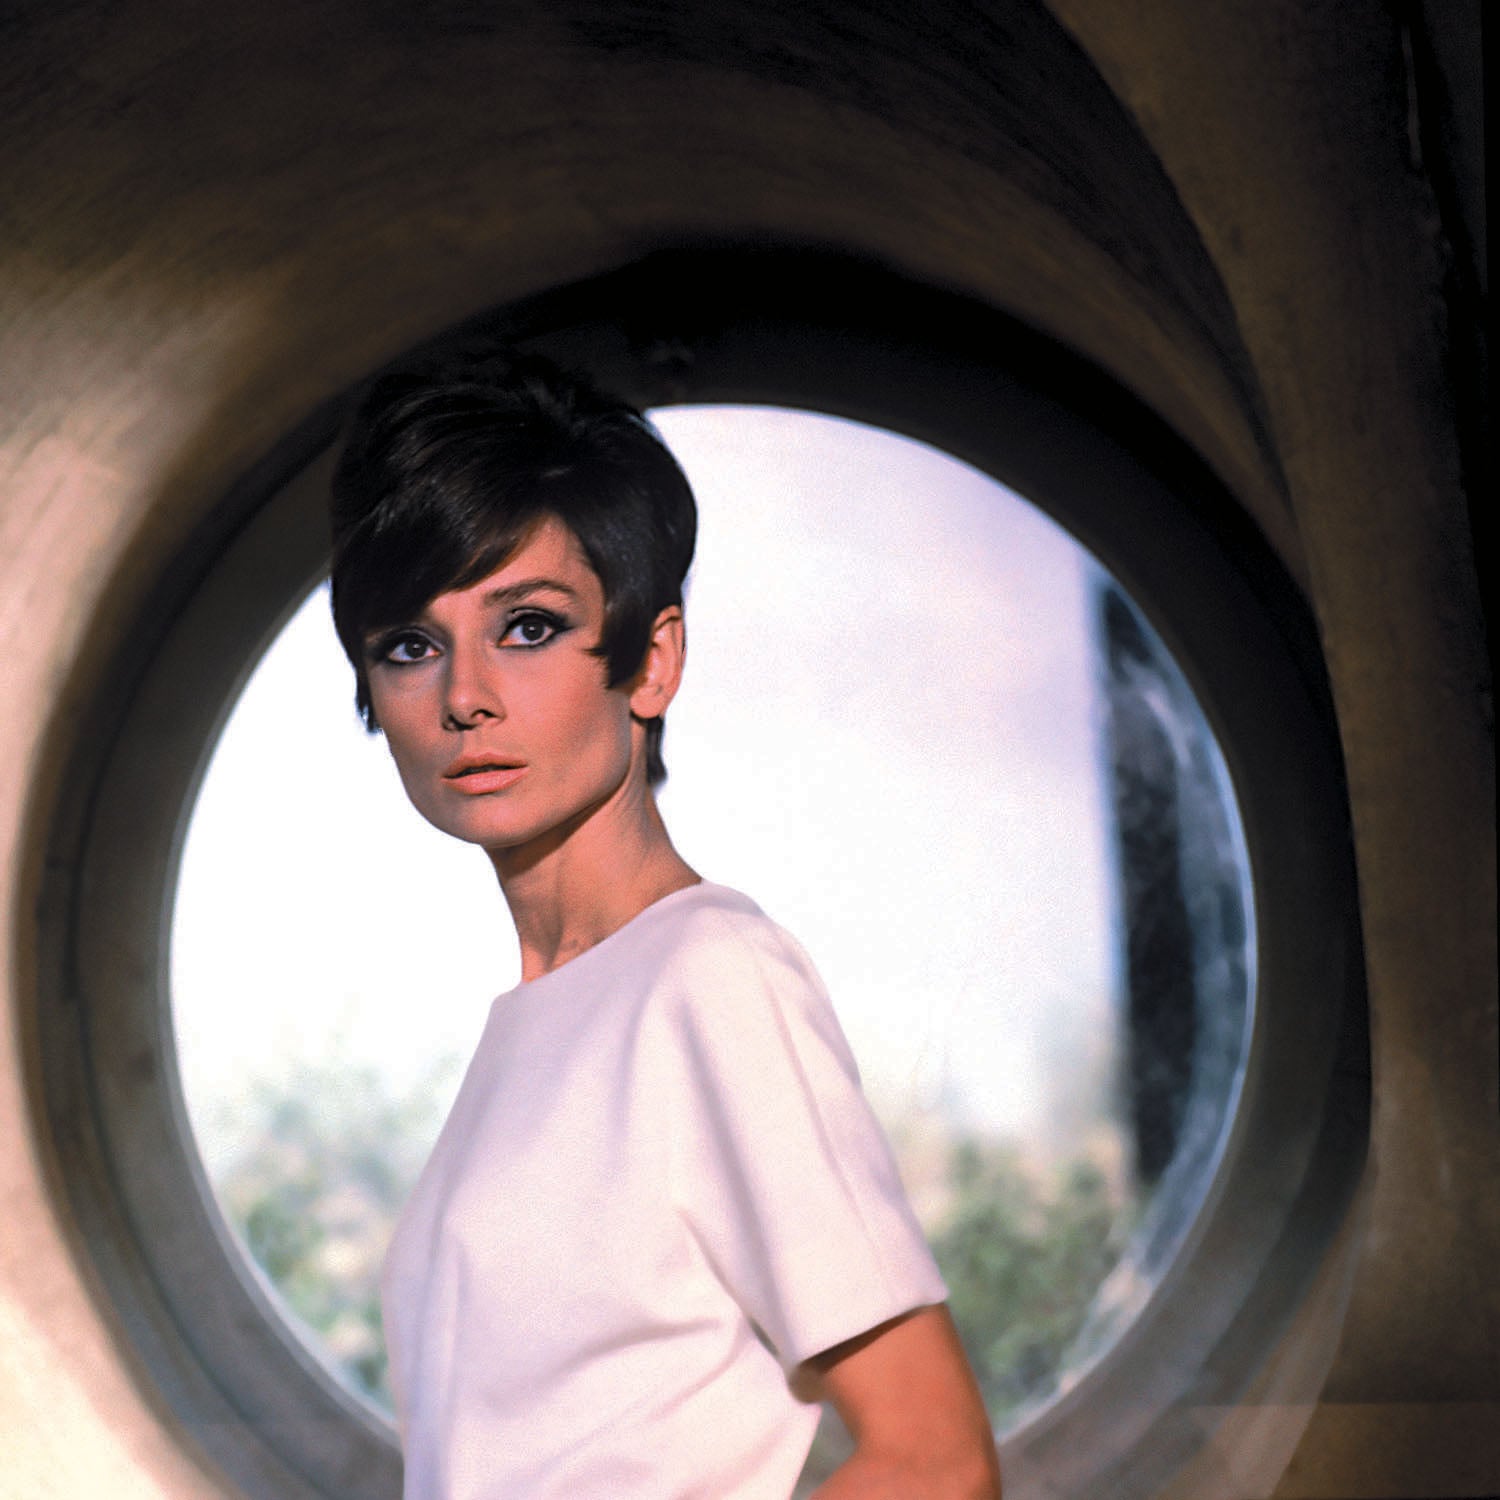 HOW TO STEAL A MILLION, Audrey Hepburn, 1966, TM & Copyright (c) 20th Century Fox Film Corp. All rights reserved.